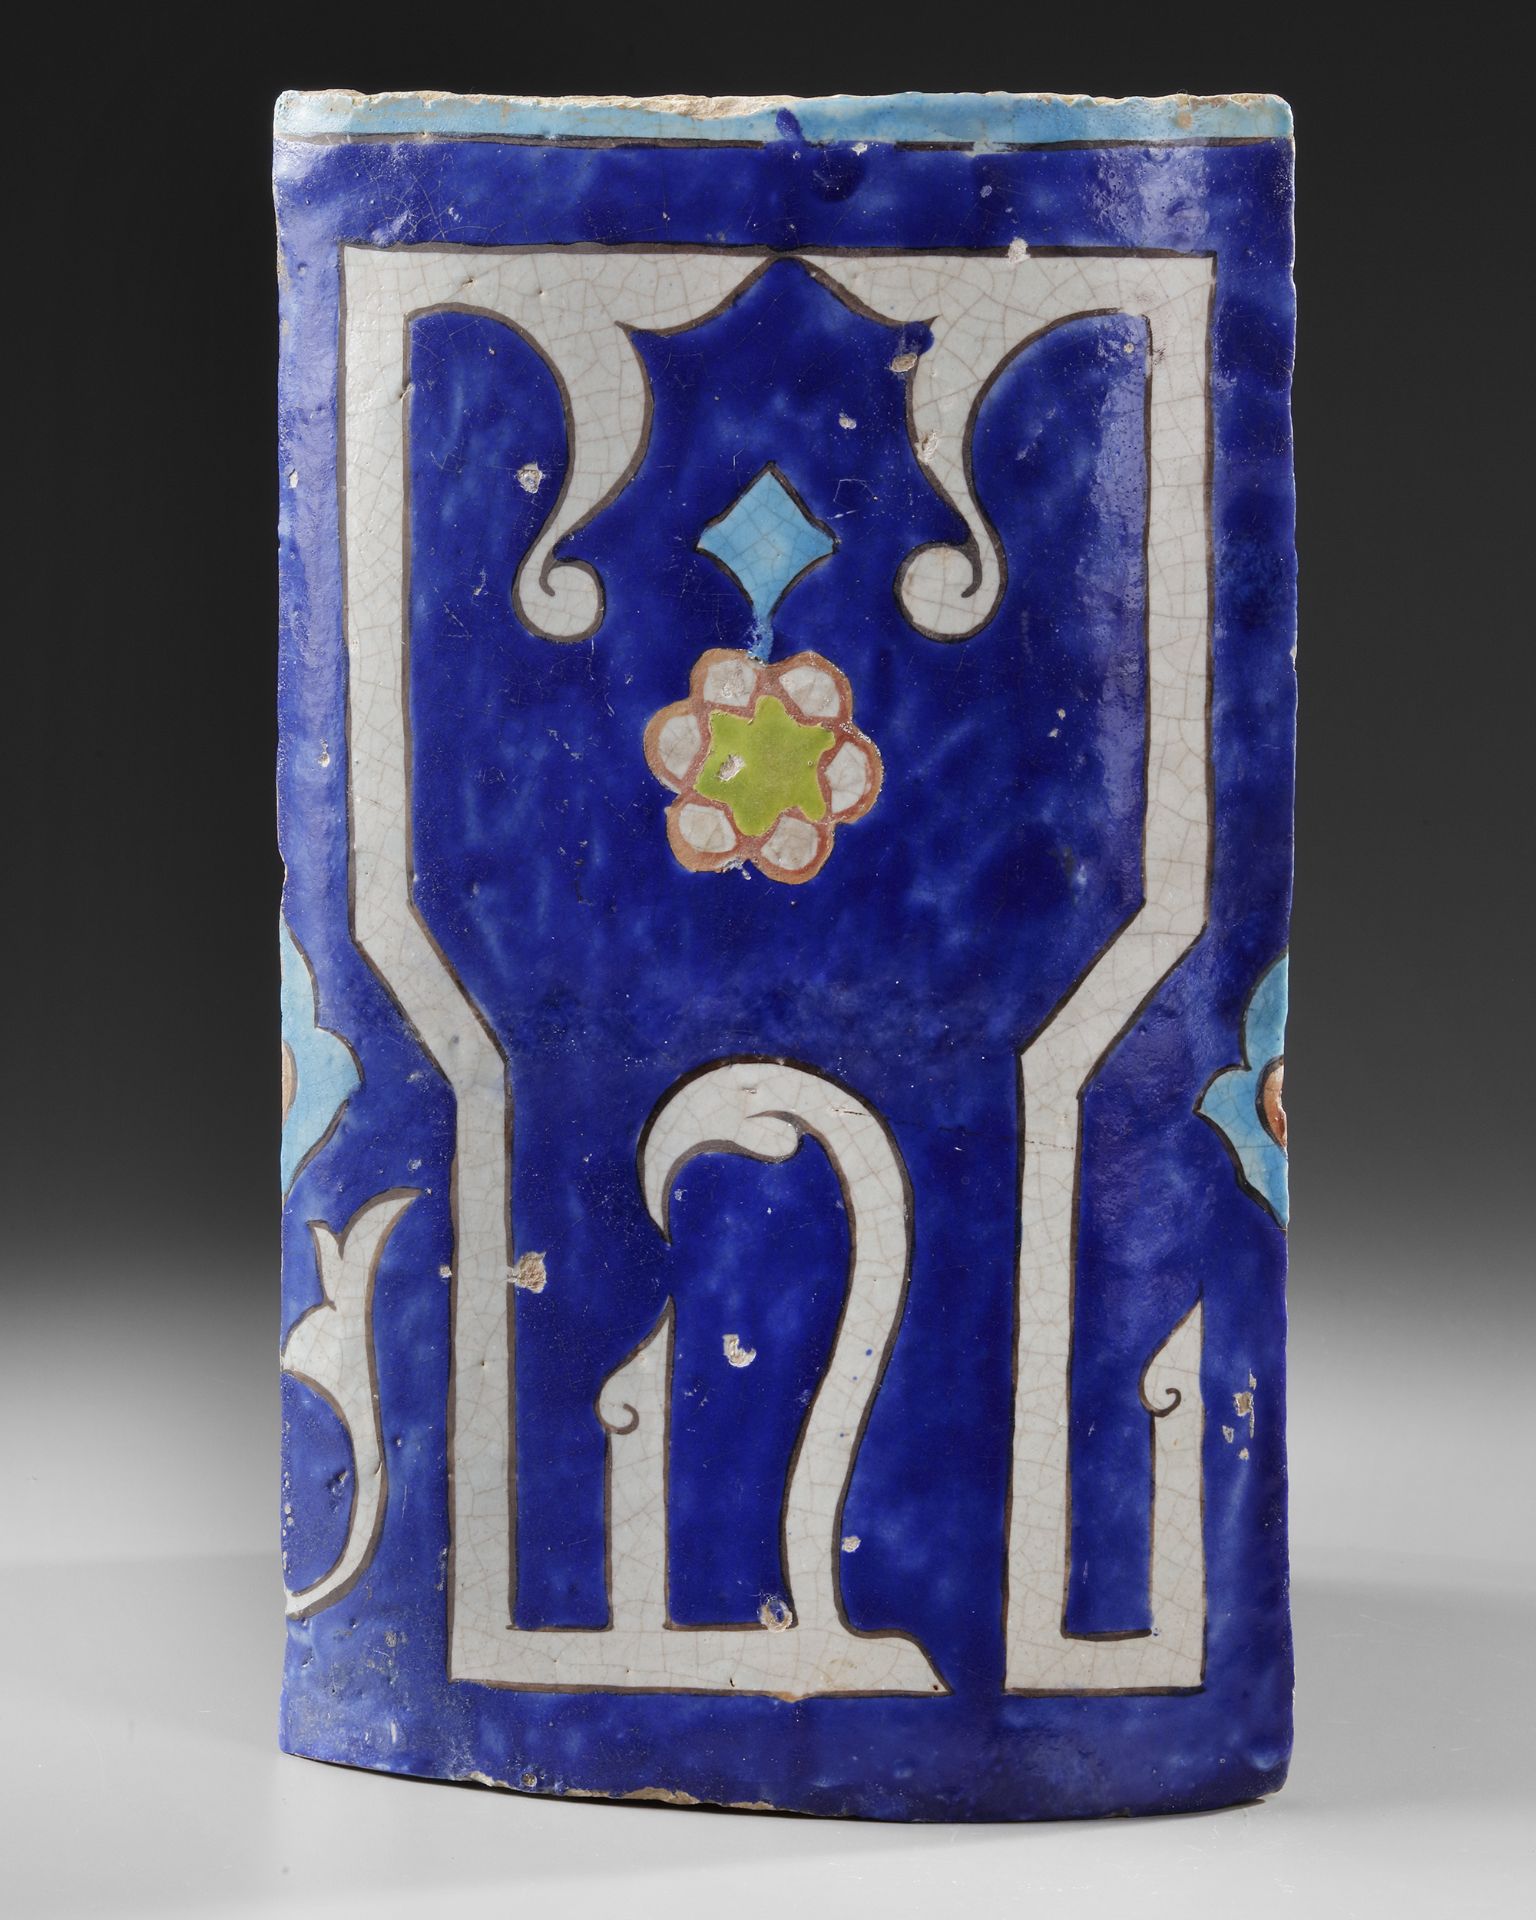 A TIMURID CALLIGRAPHIC POTTERY TILE, CENTRAL ASIA OR EASTERN PERSIA, 14TH-15TH CENTURY - Image 2 of 10